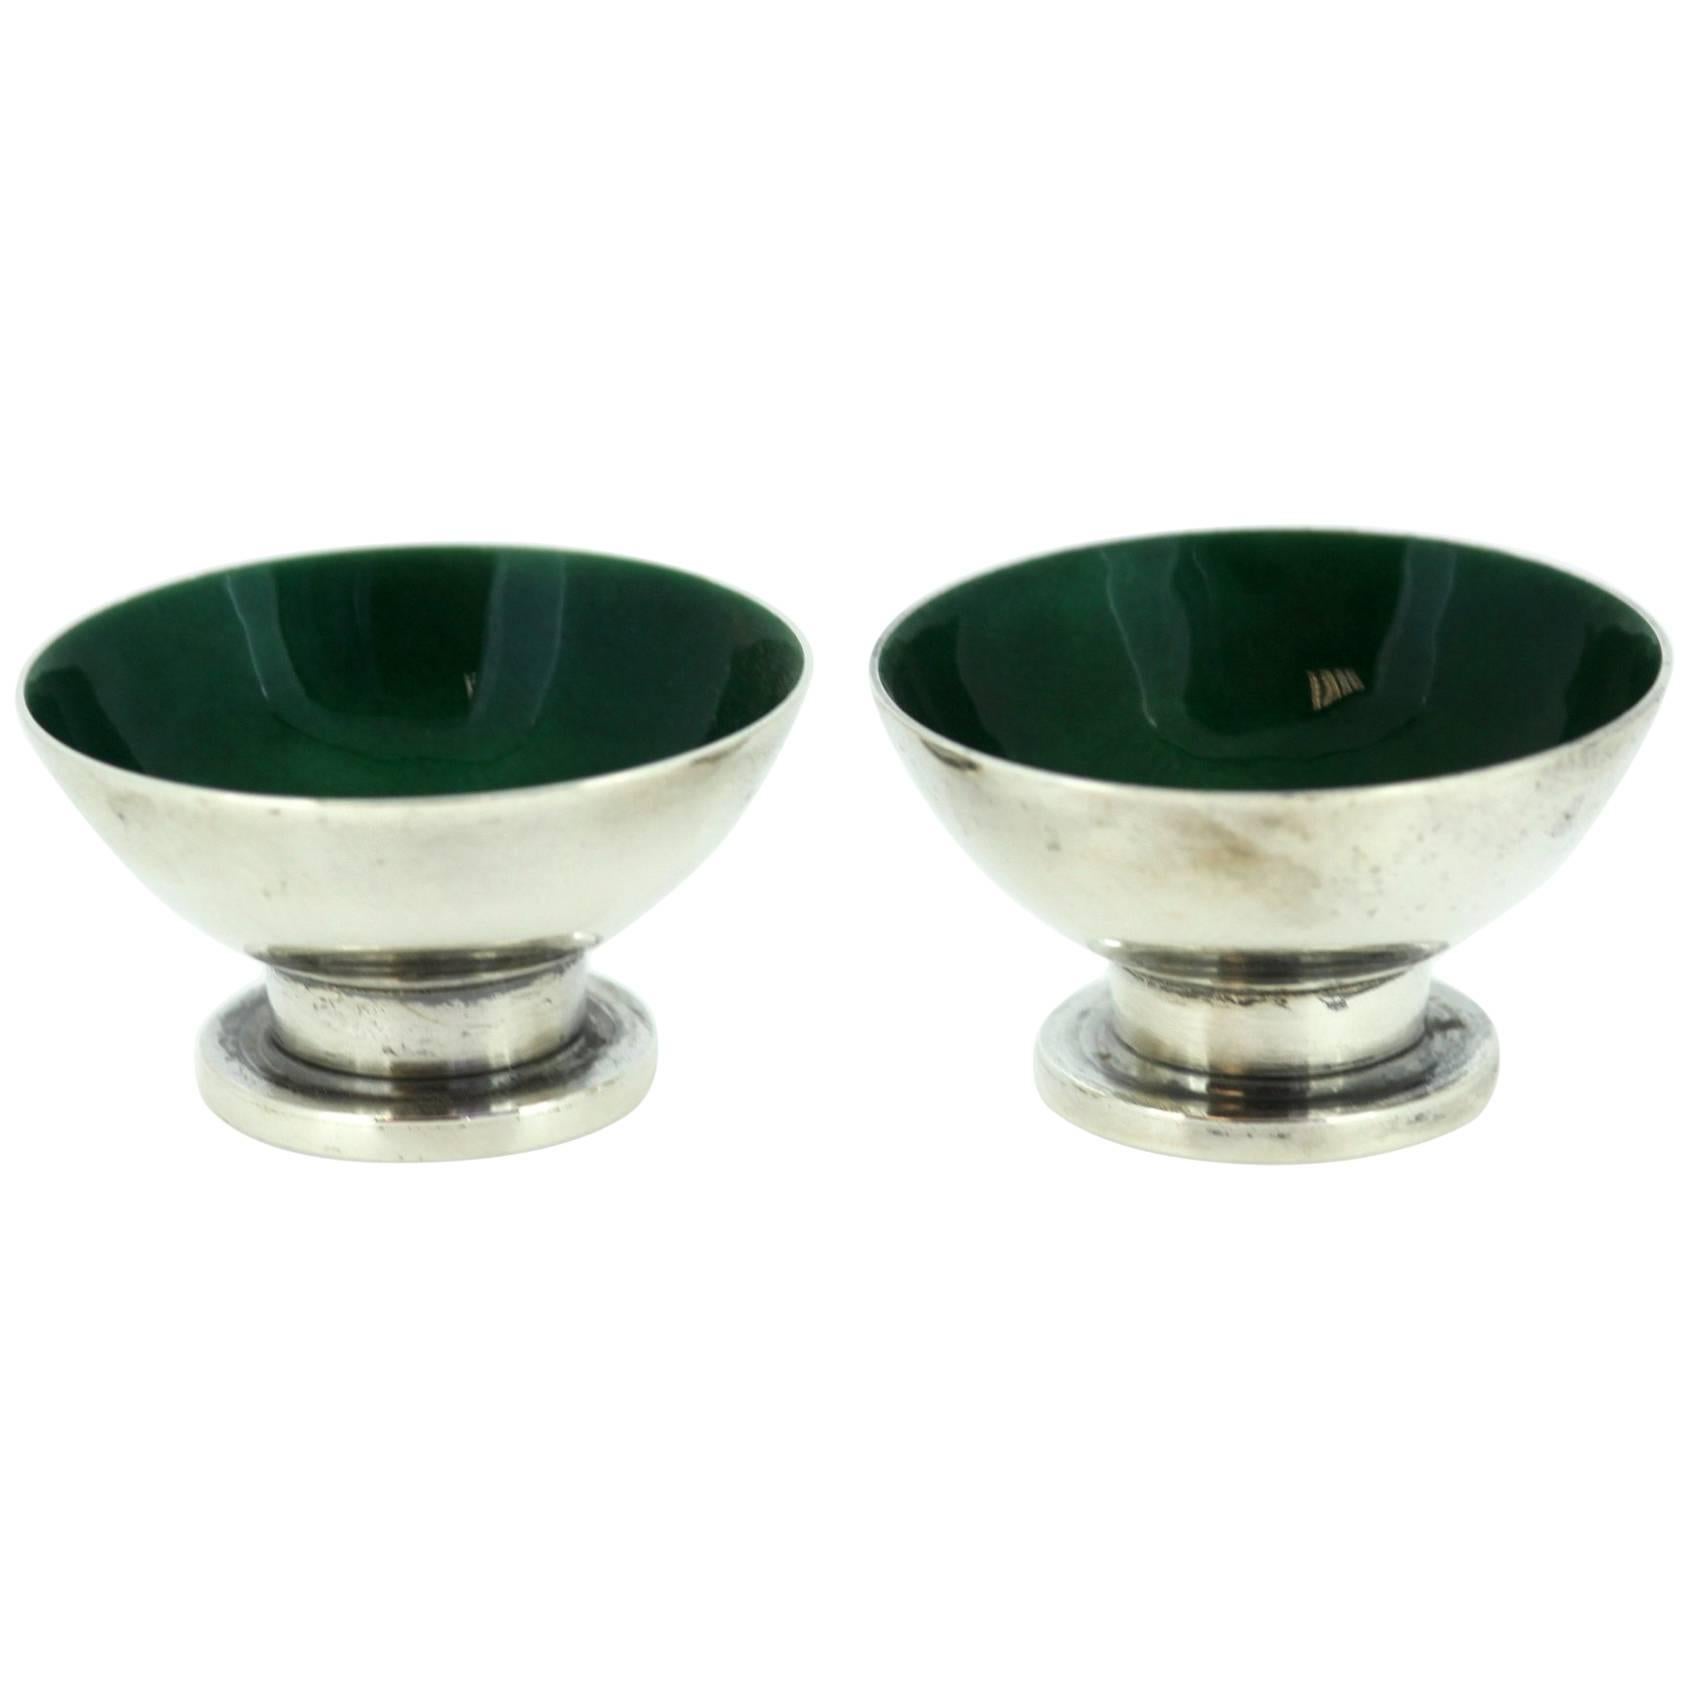 George Jensen, USA, Sterling Silver and Green Enamel Pair of Egg Holders, 1980s